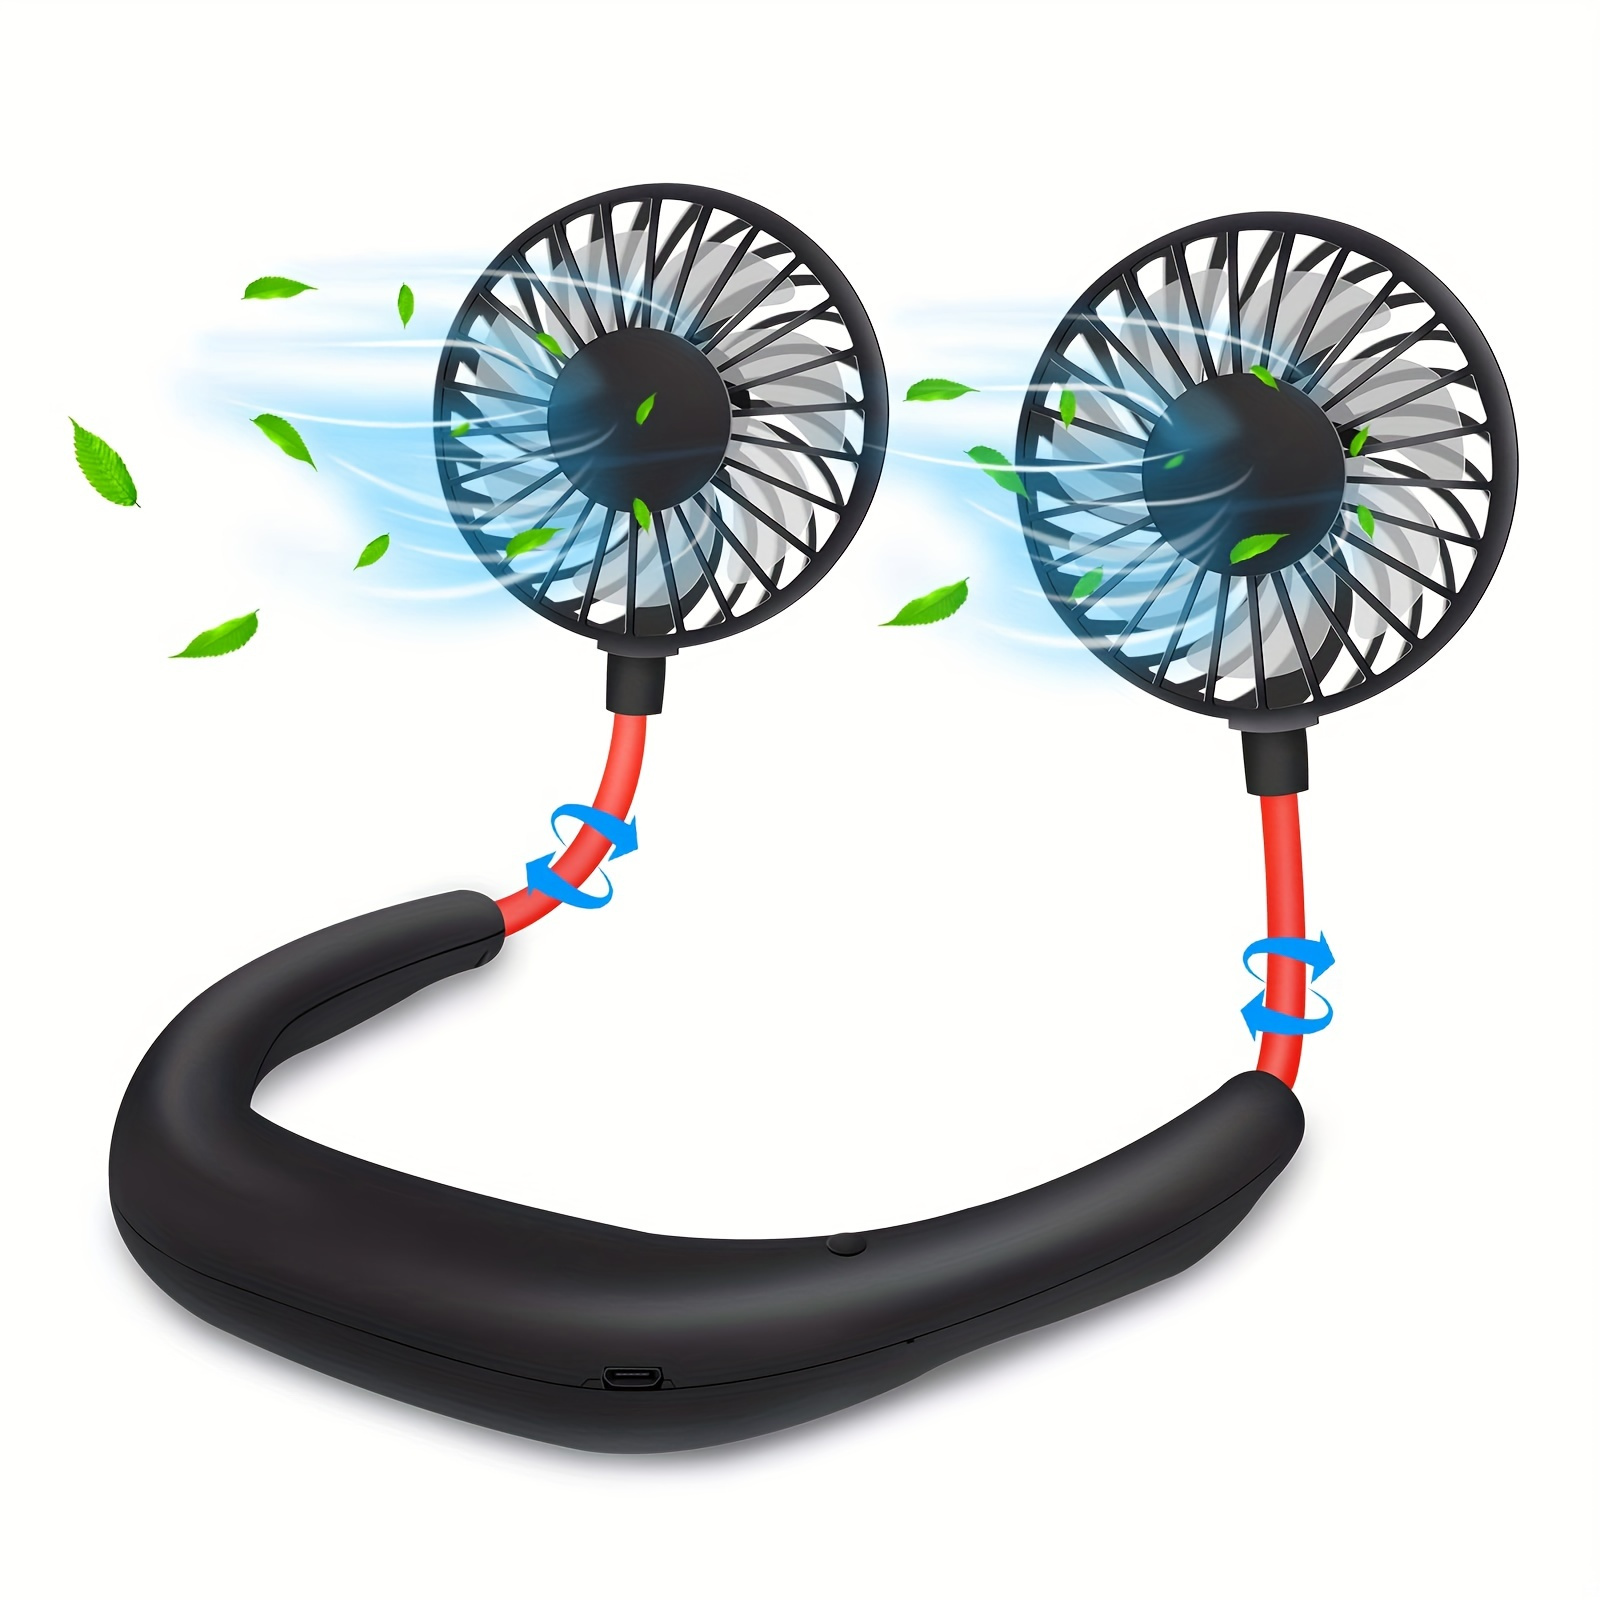 

1pc Usb Rechargeable Portable Neck Fan - Hands-free Personal Wear Fan With 360° Adjustable 3-speed Settings For Travel, Office, Home, And Outdoor Use